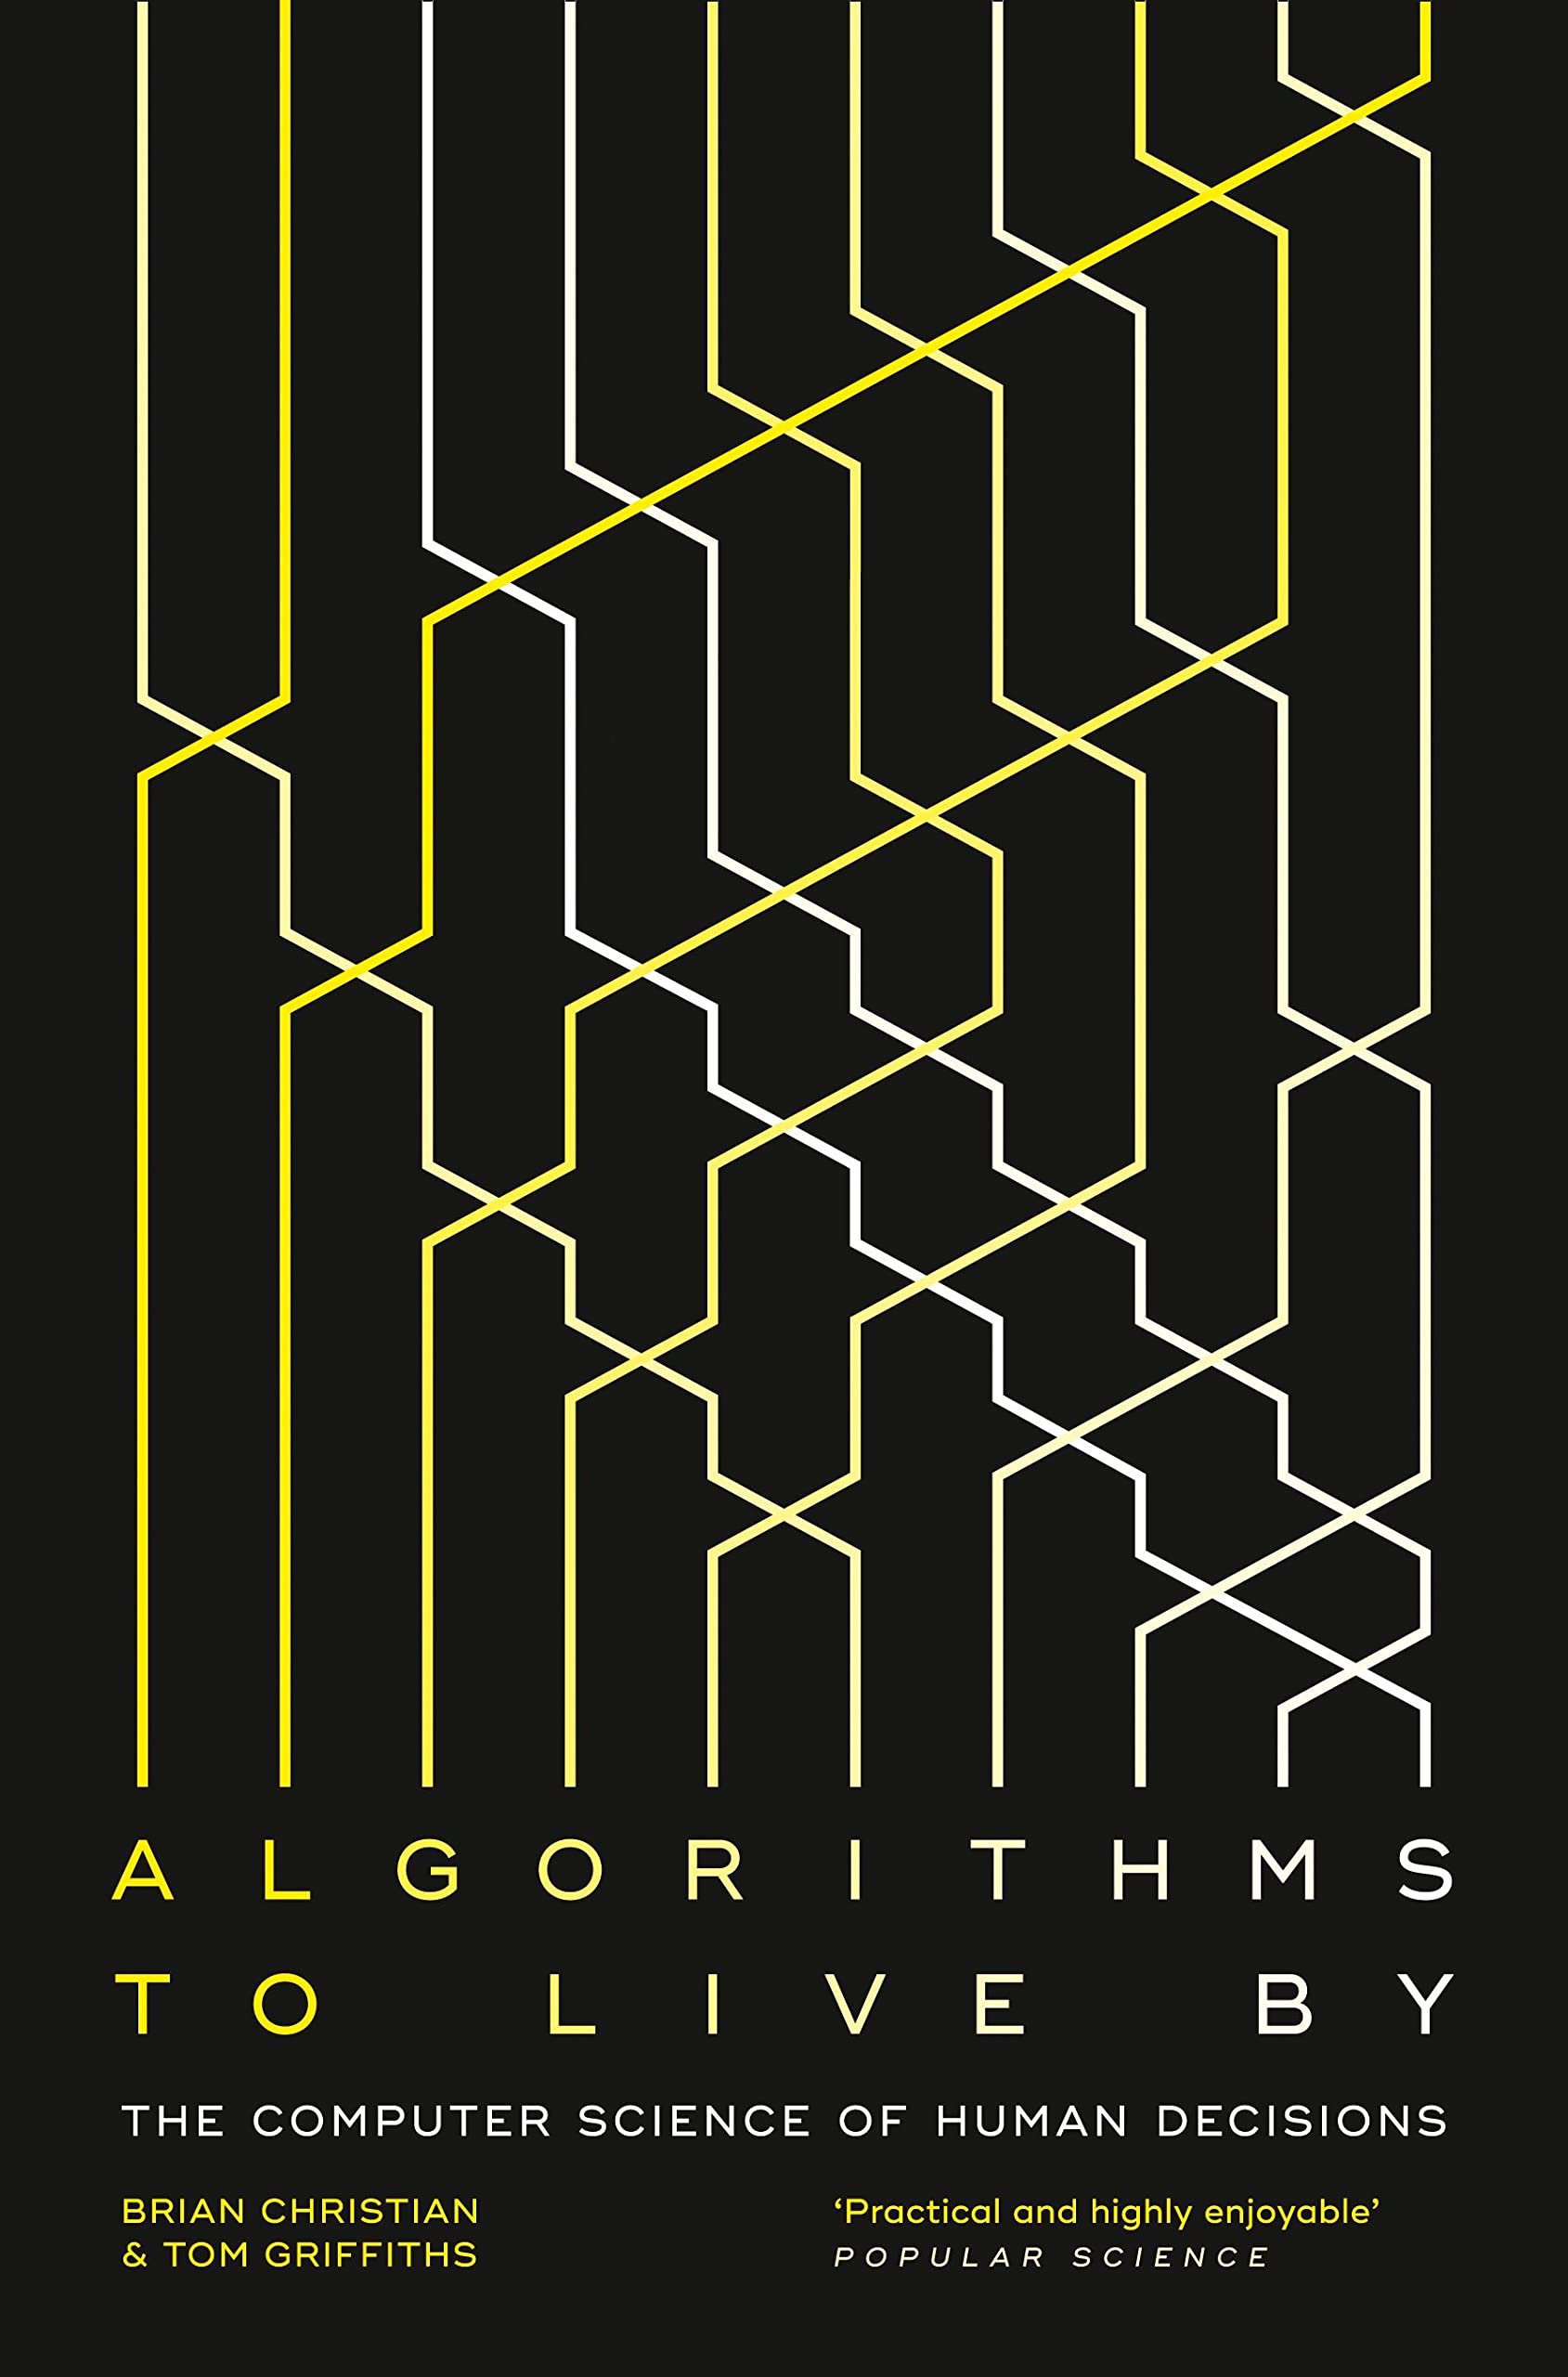 Book Cover of “Algorithms to Live By - The Computer Science of Human Decisions”